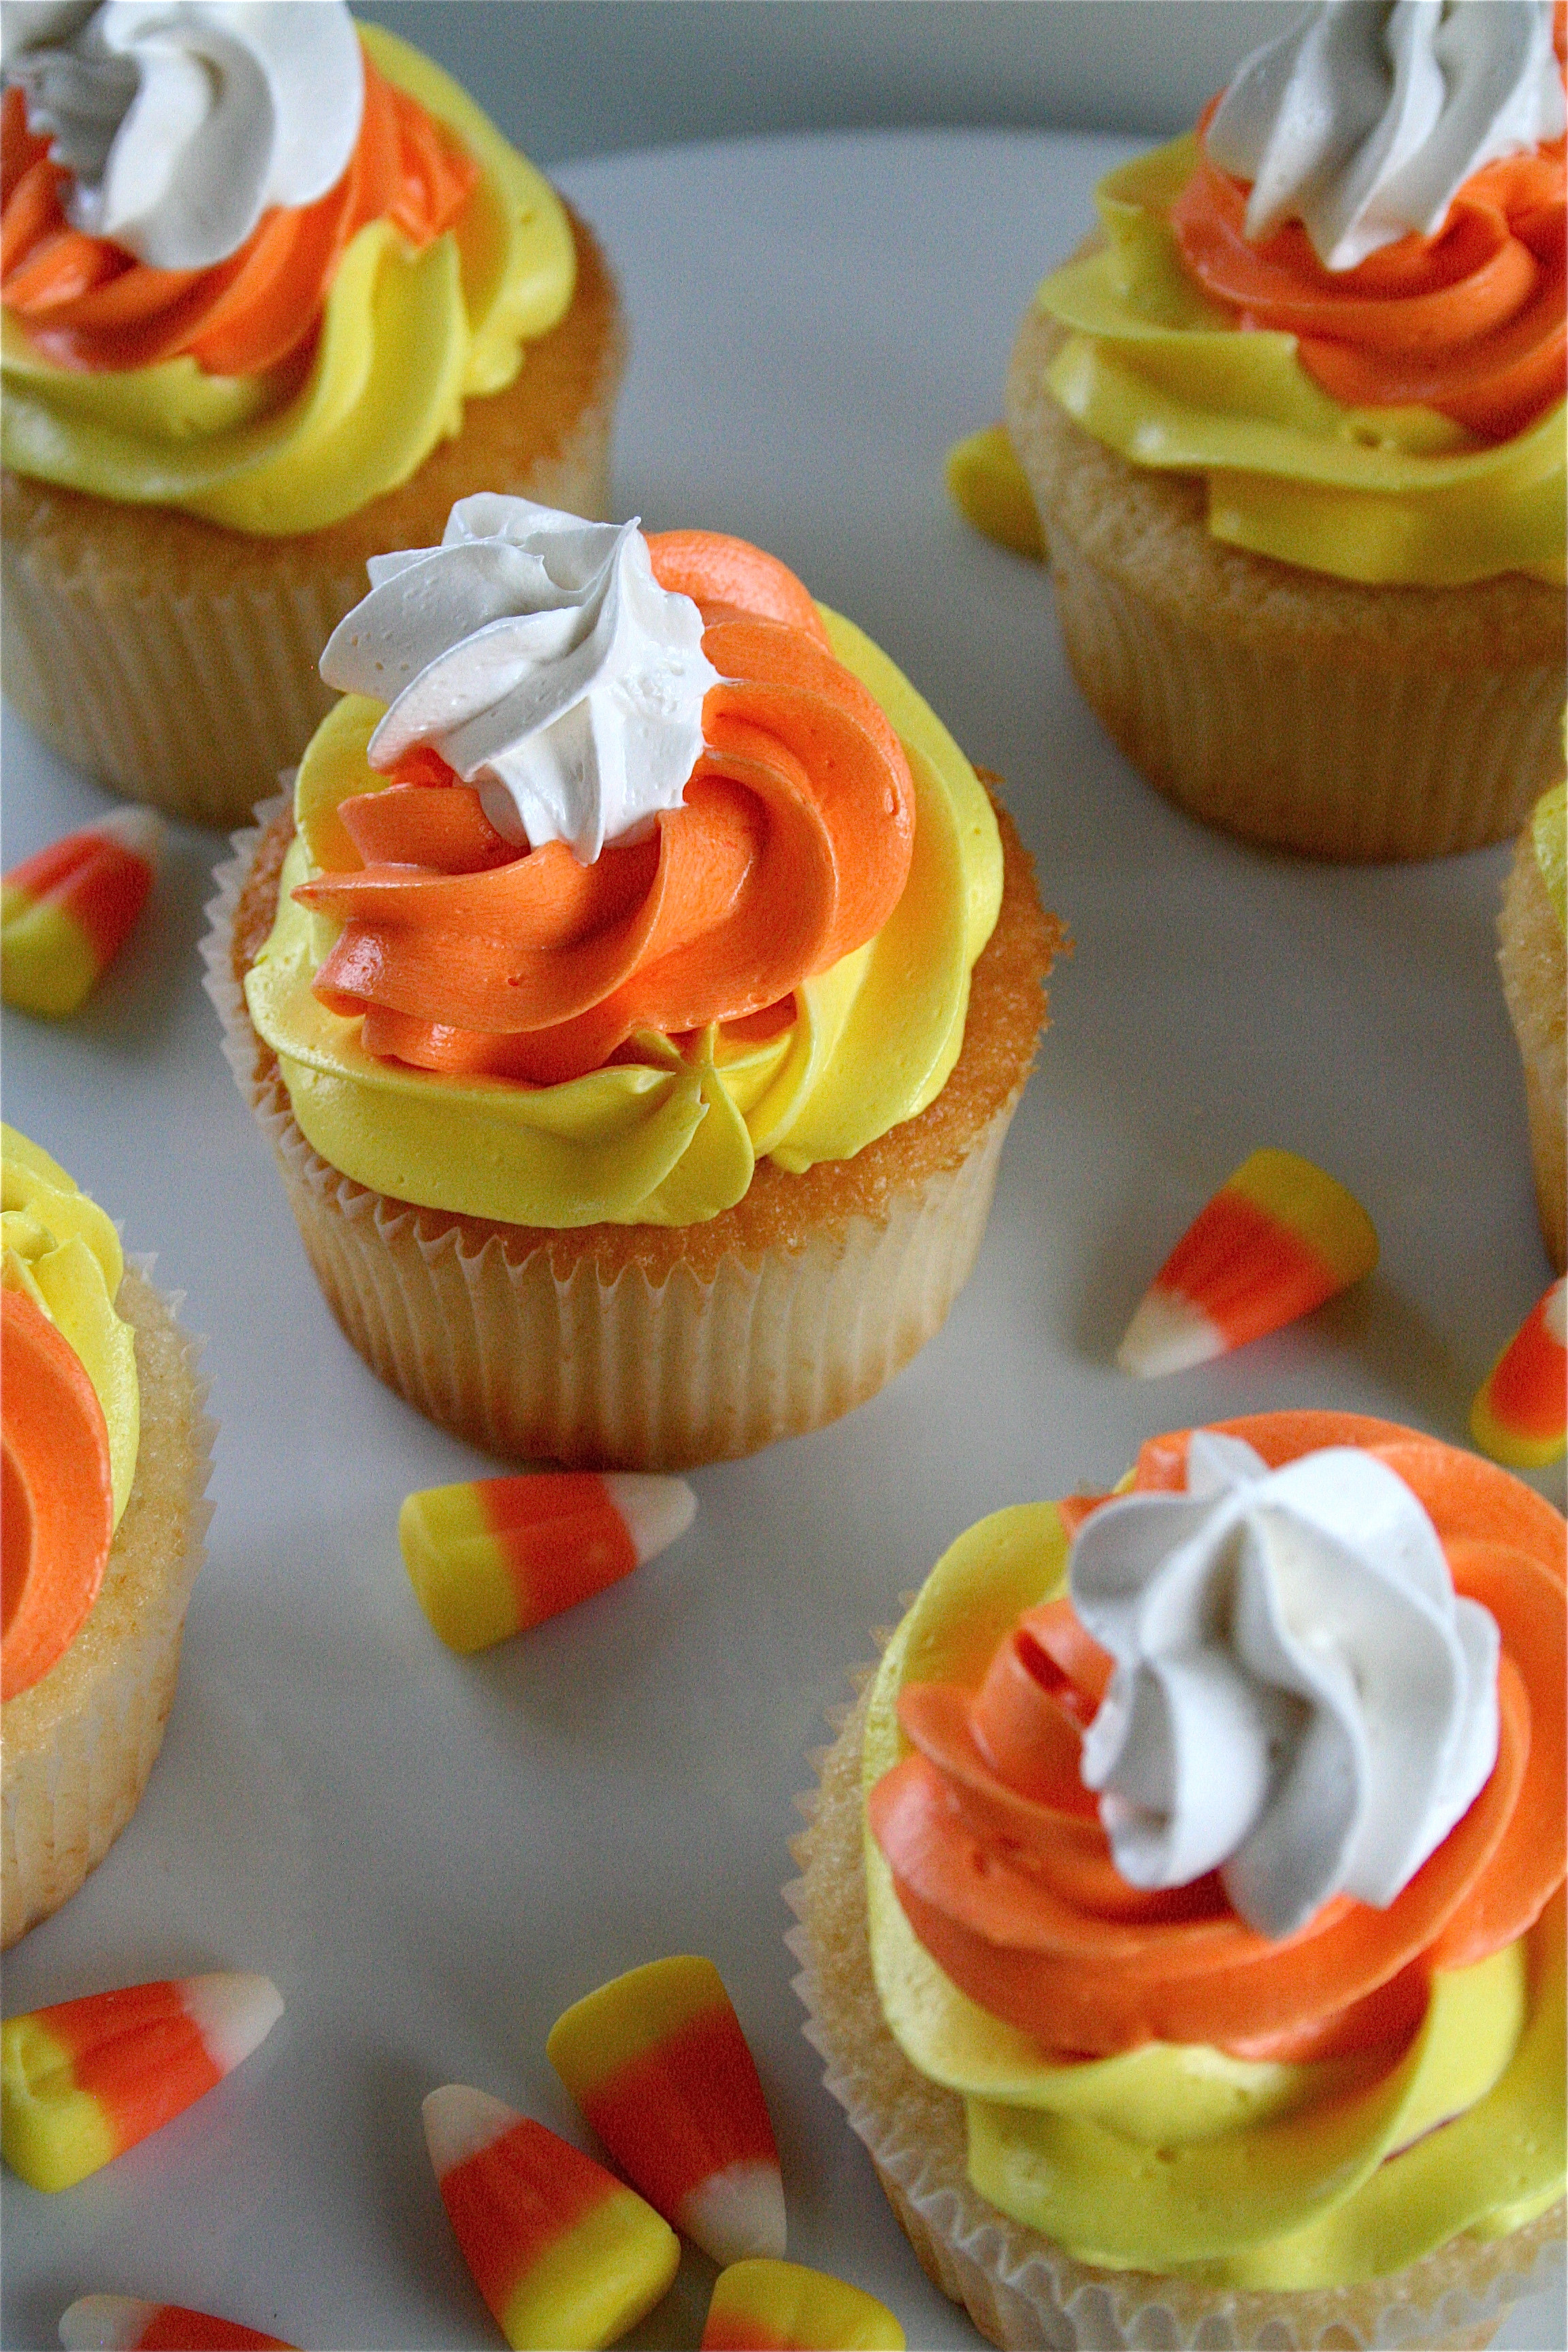 Cupcakes For Halloween
 28 Cute Halloween Cupcakes Easy Recipes for Halloween